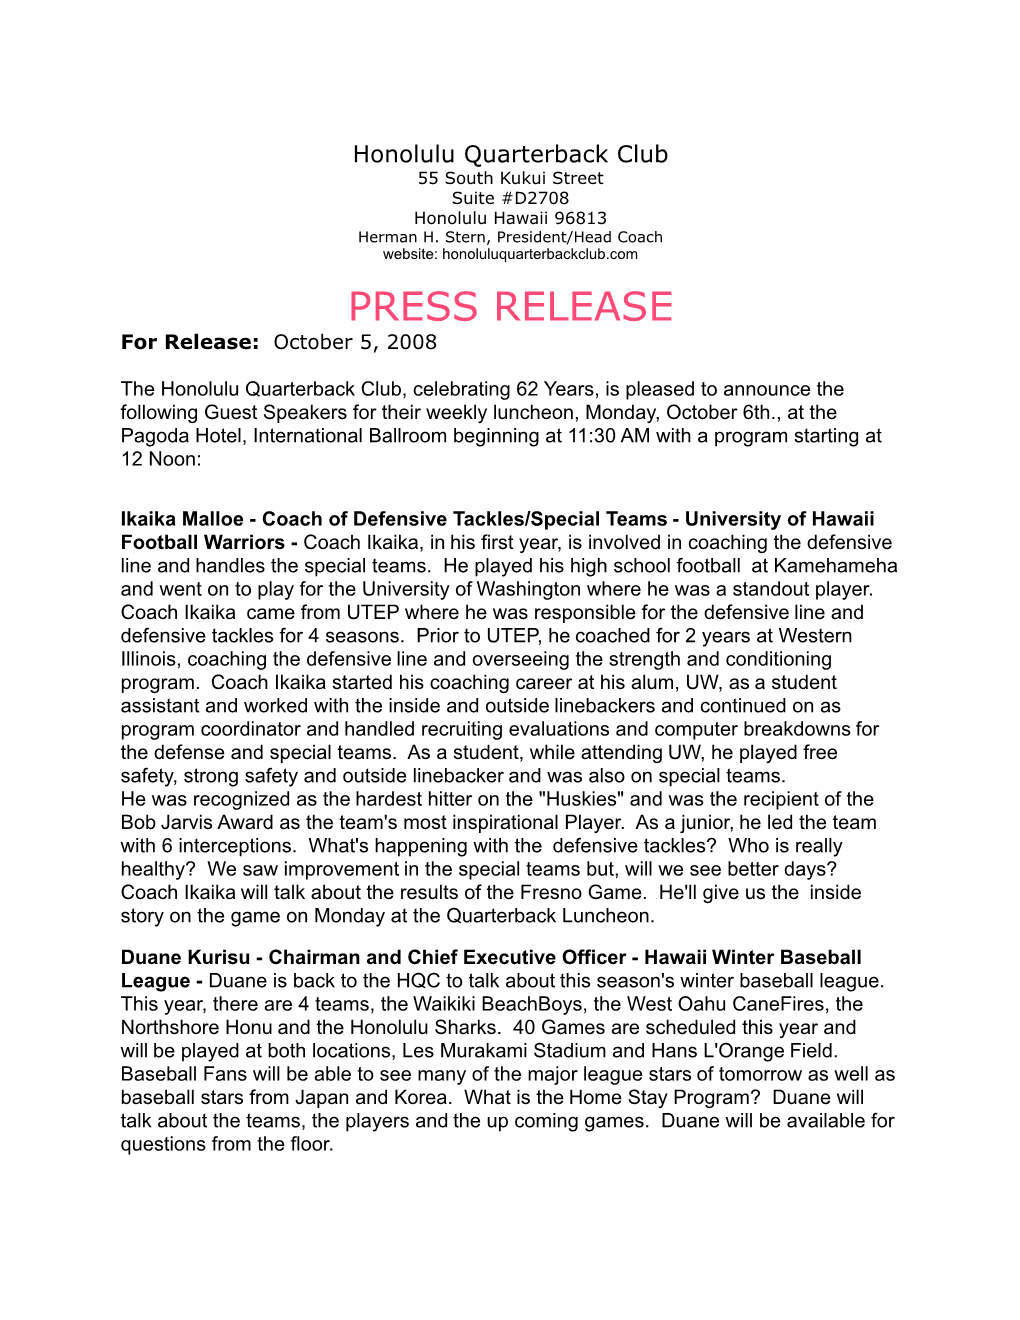 PRESS RELEASE for Release: October 5, 2008